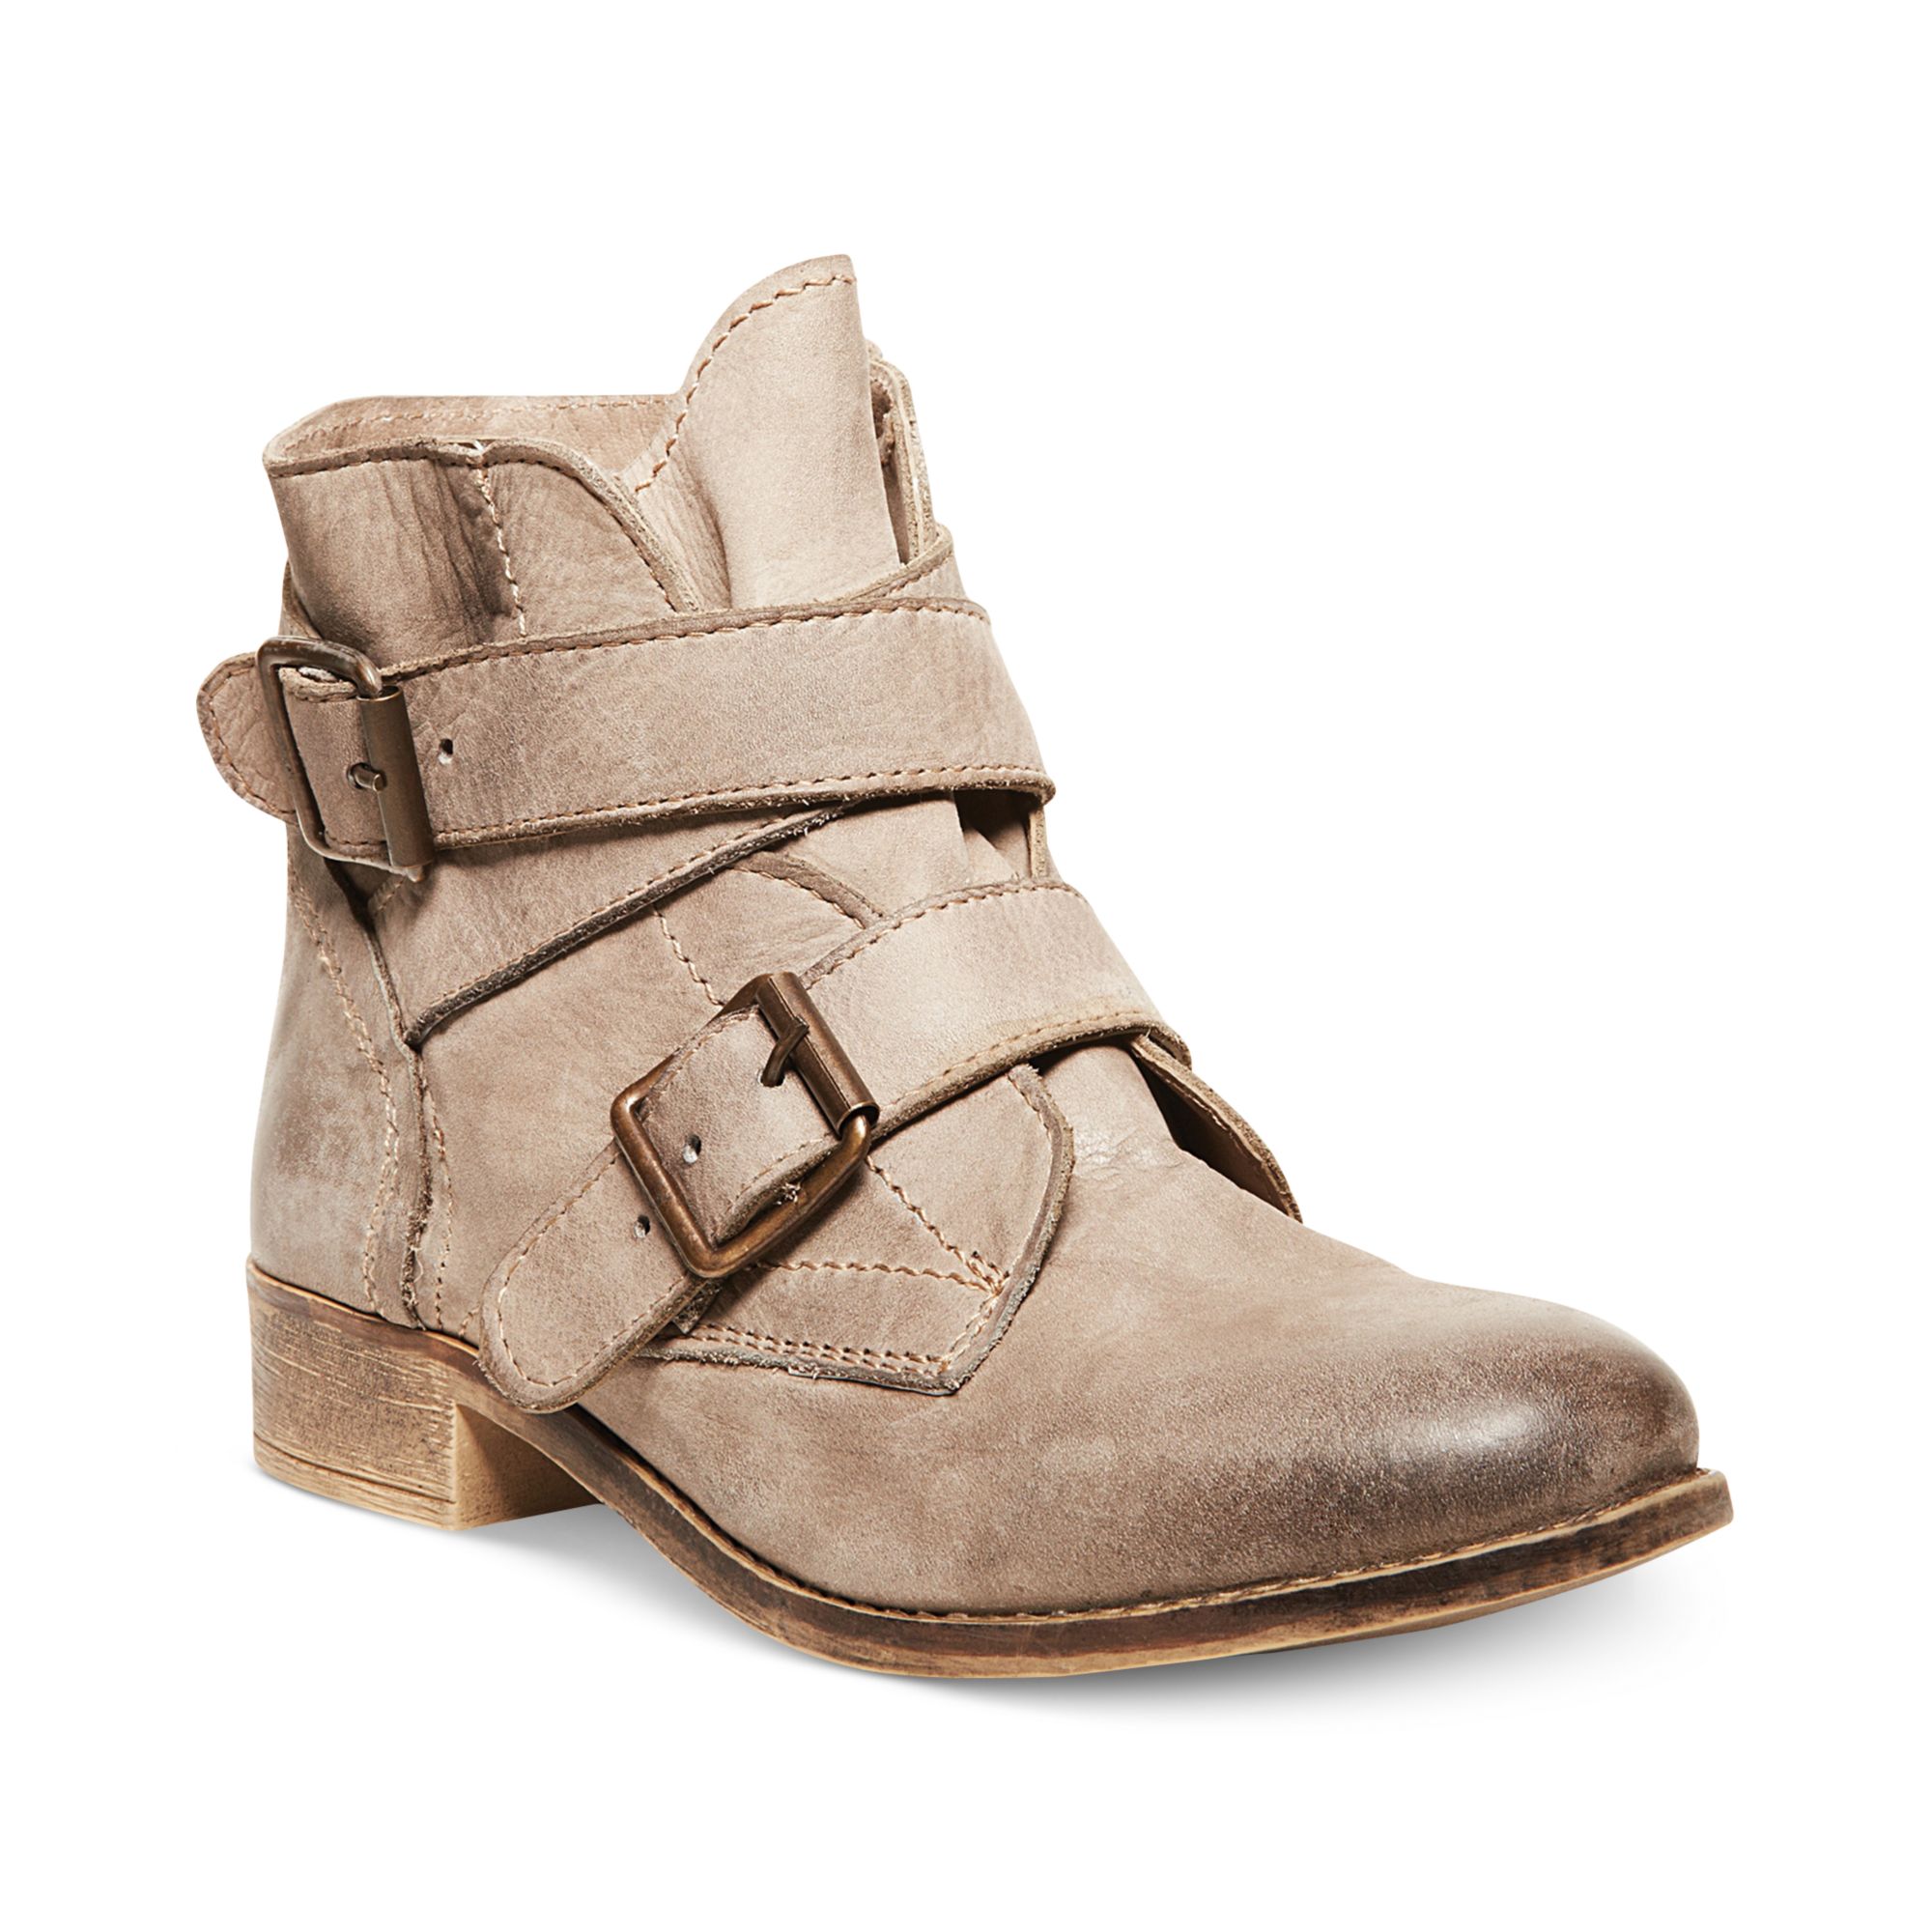 Territory Boots Steve Madden Norway, SAVE 47% - lutheranems.com